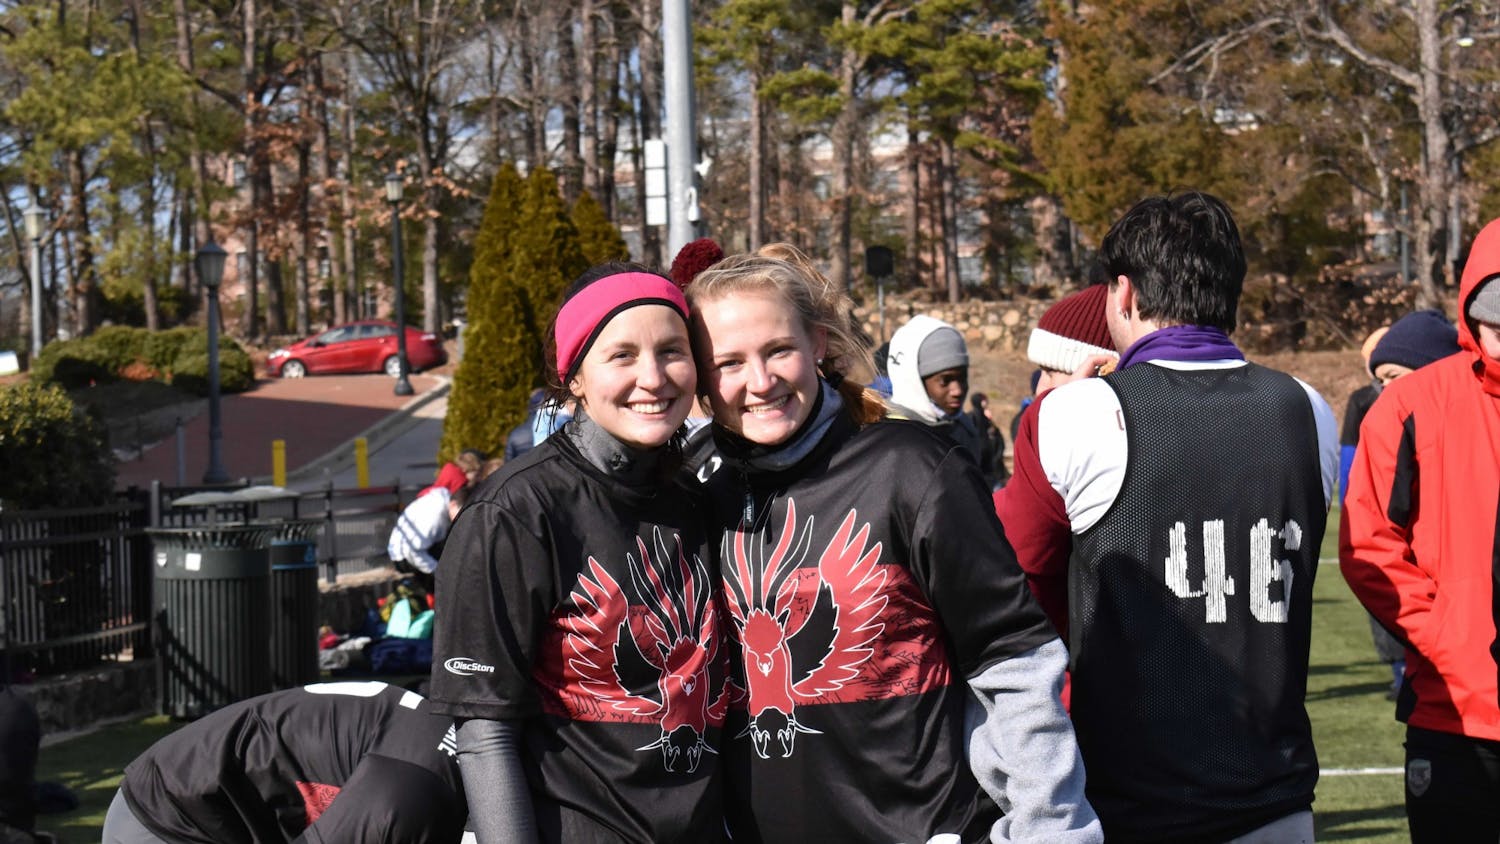 Libby Pung and Colleen Morton of the Gamecock Ultimate Frisbee club team stand in their jerseys at the Carolina versus Chapel Hill Kickoff on Jan. 29, 2022. &nbsp;The team welcomes female players, Morton and Pung, to its traditionally all-male roster.